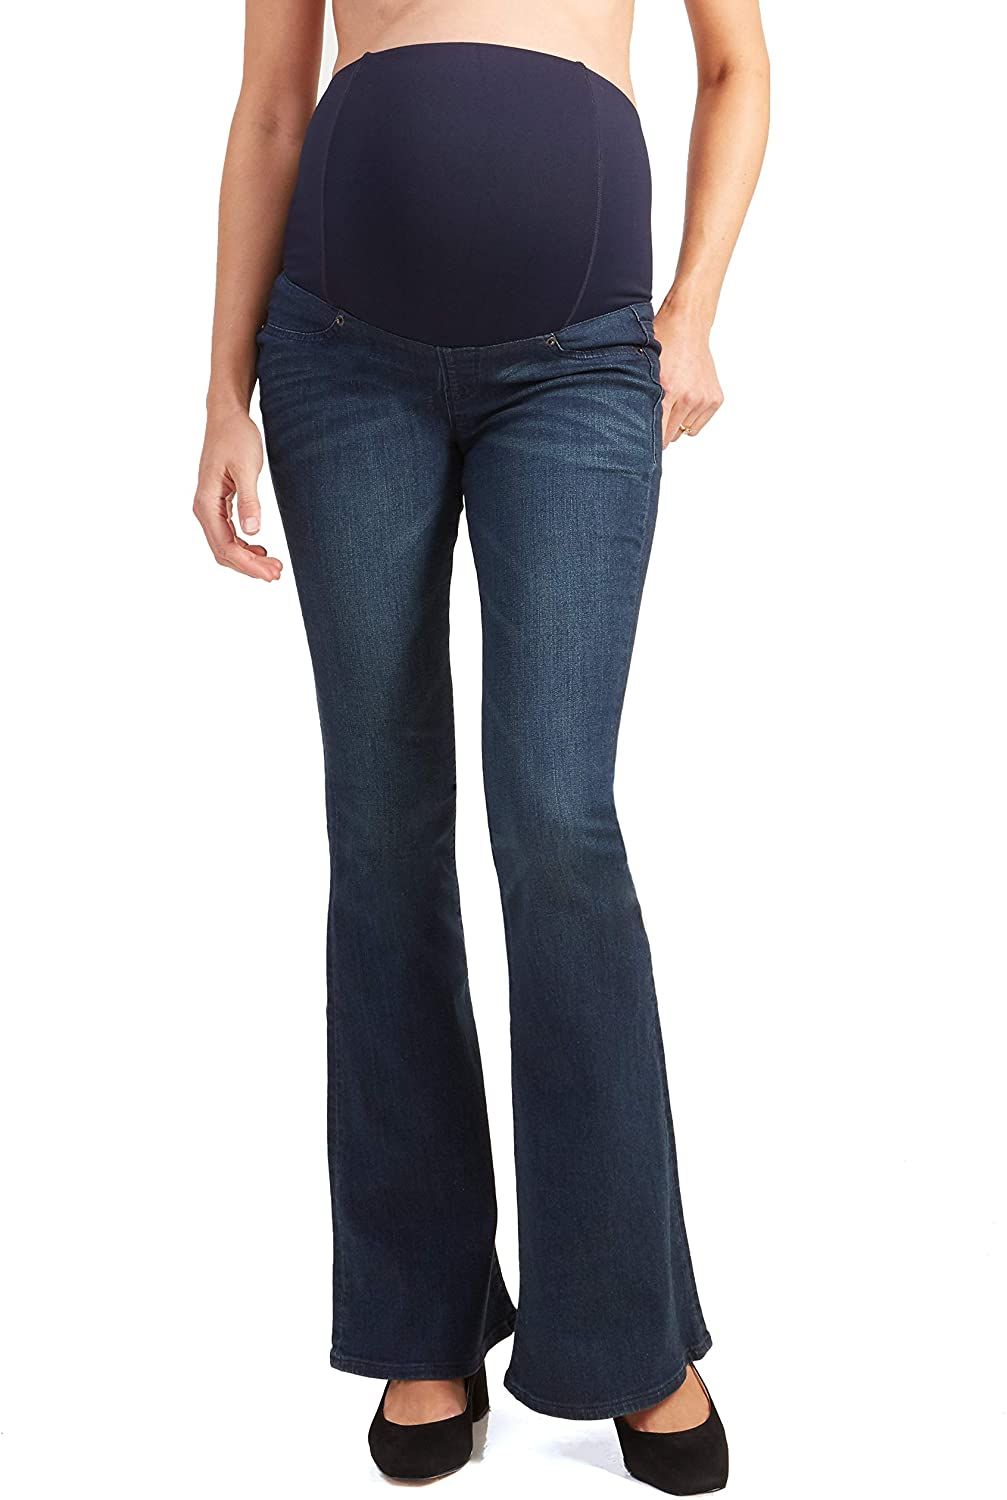 Best Maternity Jeans (Updated 2020)